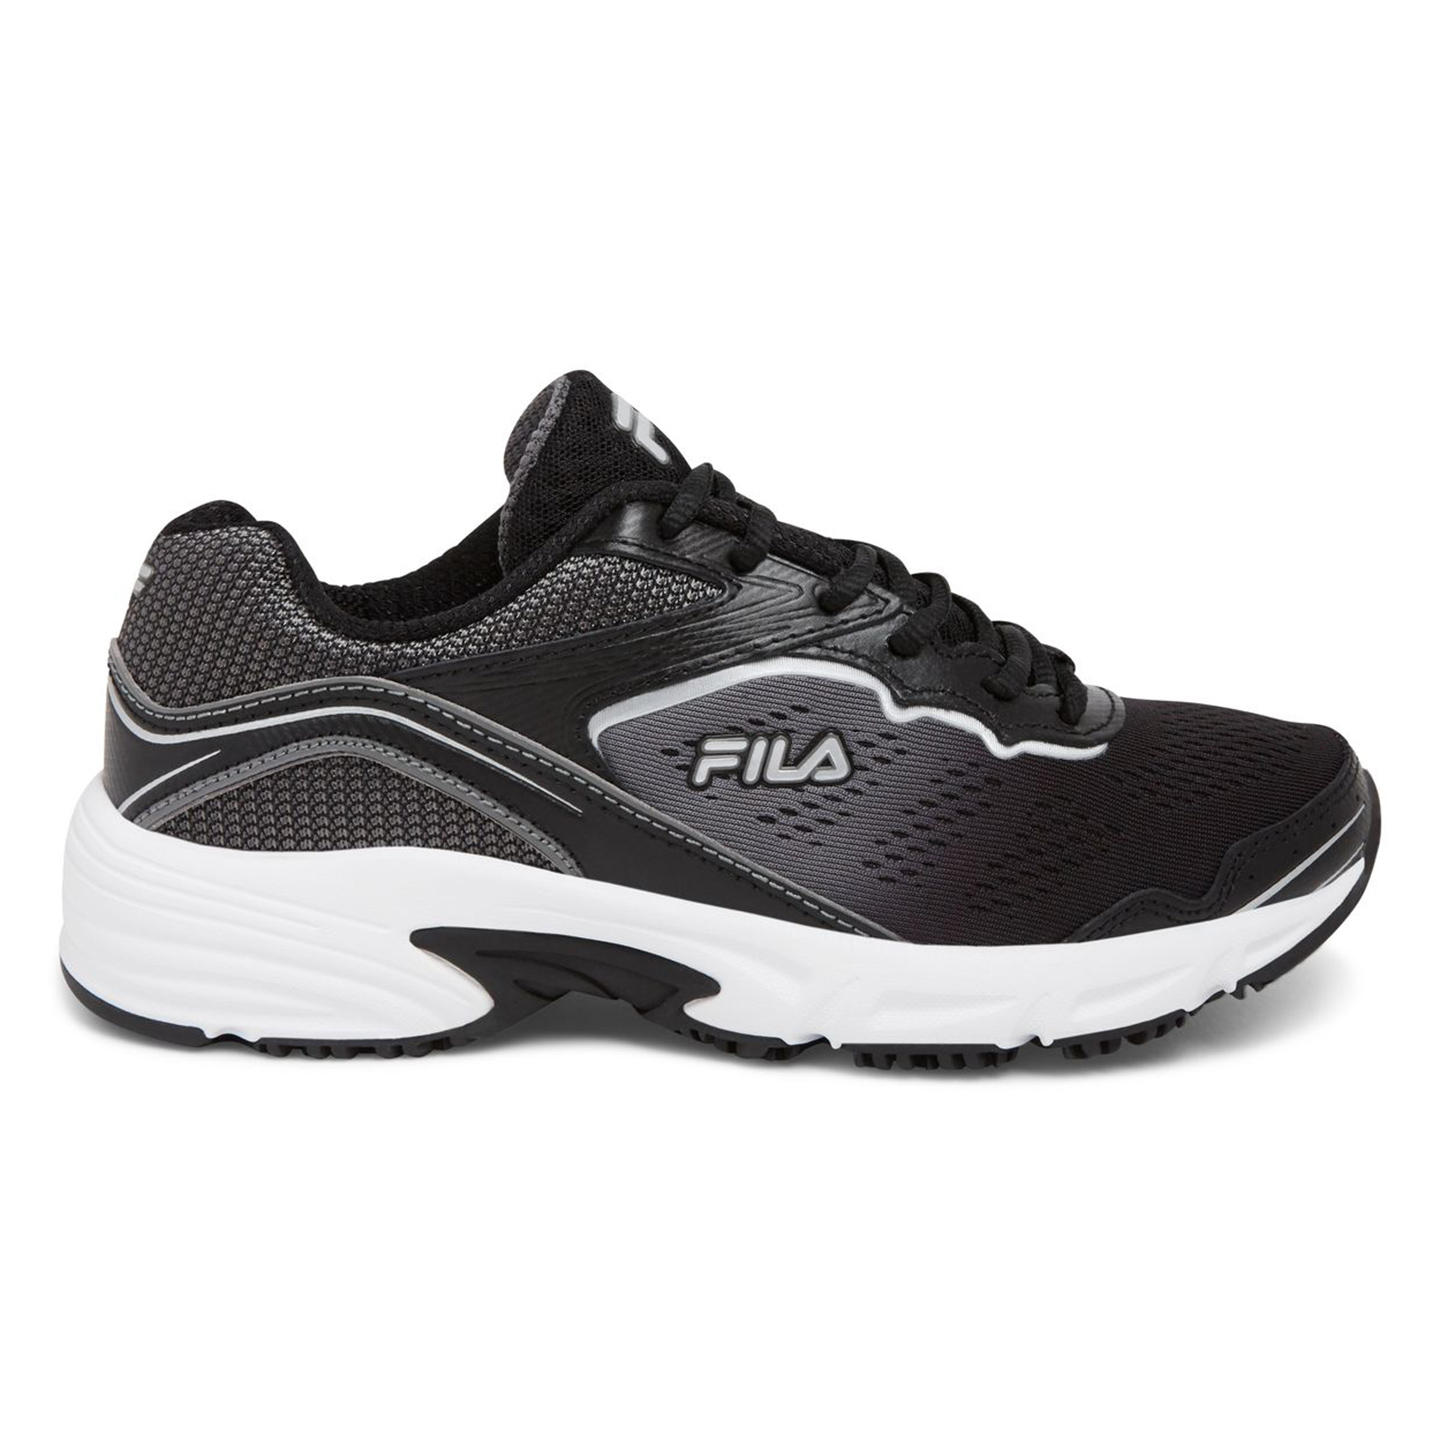 Fila Runtronic Women's Work Athletic Shoe with Slip-Resistant Outsole ...